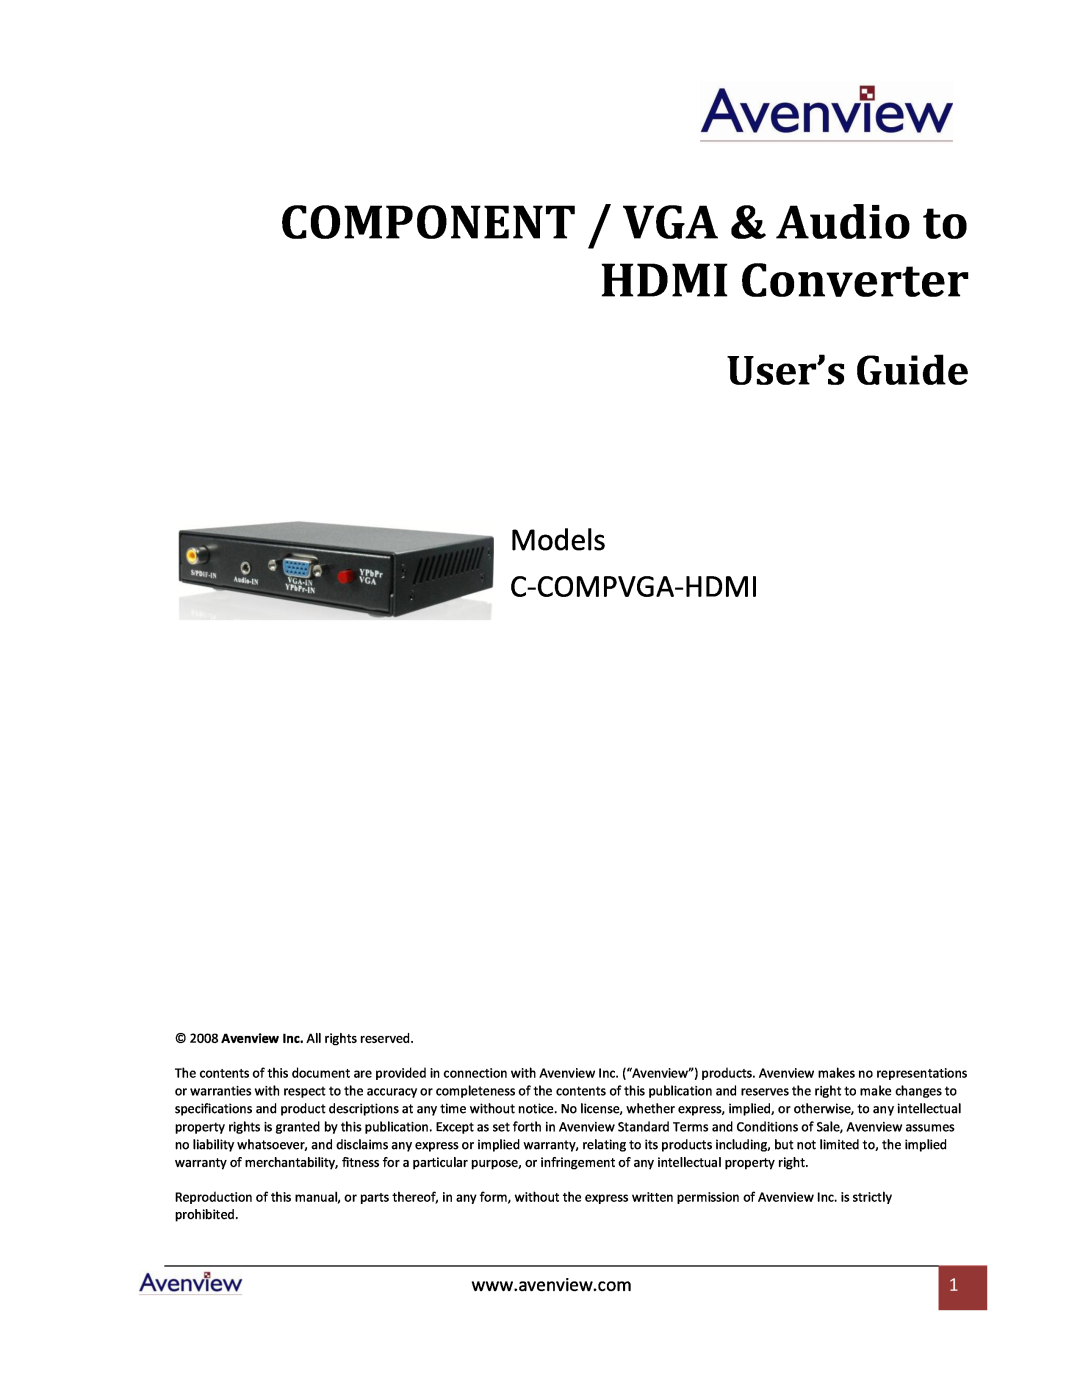 Avenview specifications COMPONENT / VGA & Audio to HDMI Converter, User’s Guide, Models C-COMPVGA-HDMI 